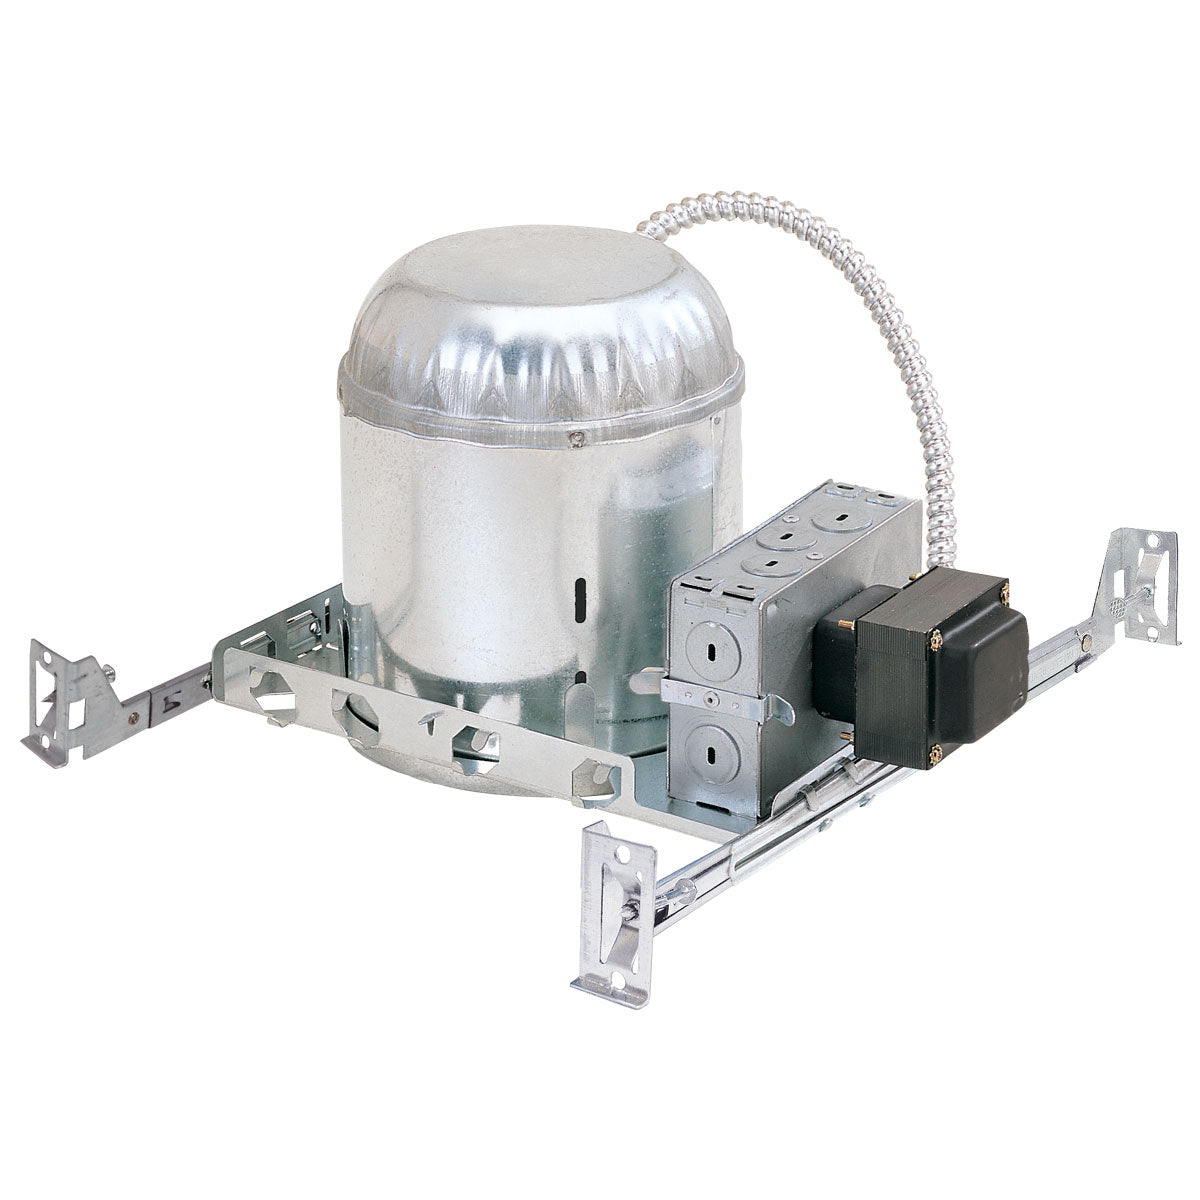 Nora Lighting NL-601Q - Recessed - 6 Inch Low Voltage Housing, 120V/12V Mag. Transformer, Rated for 50W